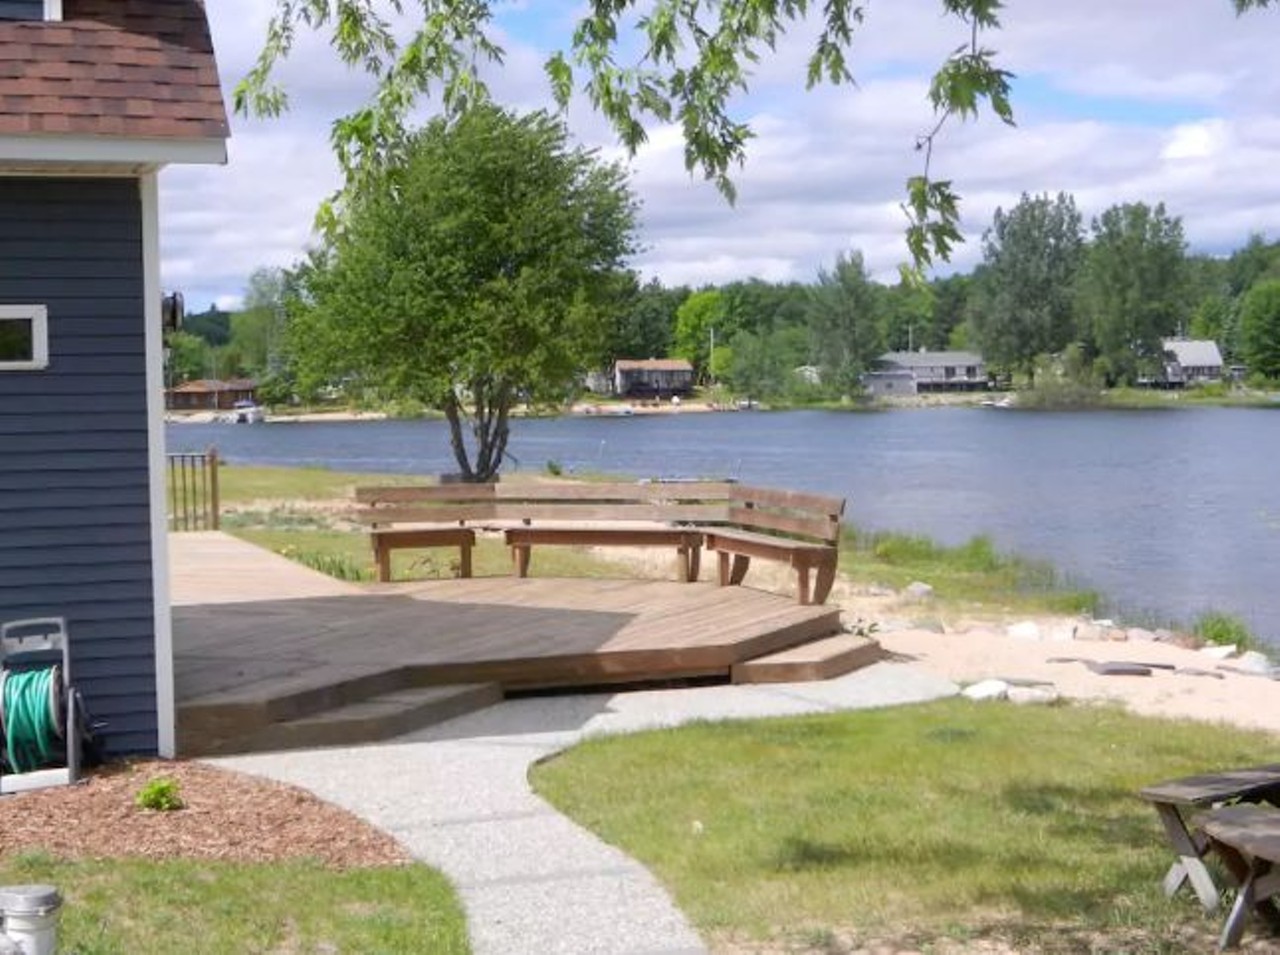 Cadillac, Michigan 
Average nightly rate: $127
With the ability to accommodate a large crowd or a couple, this cottage is the perfect family-friendly environment. The quiet location sits directly behind the lake on a relaxing deck that allows you experience the calm surroundings with ease. 